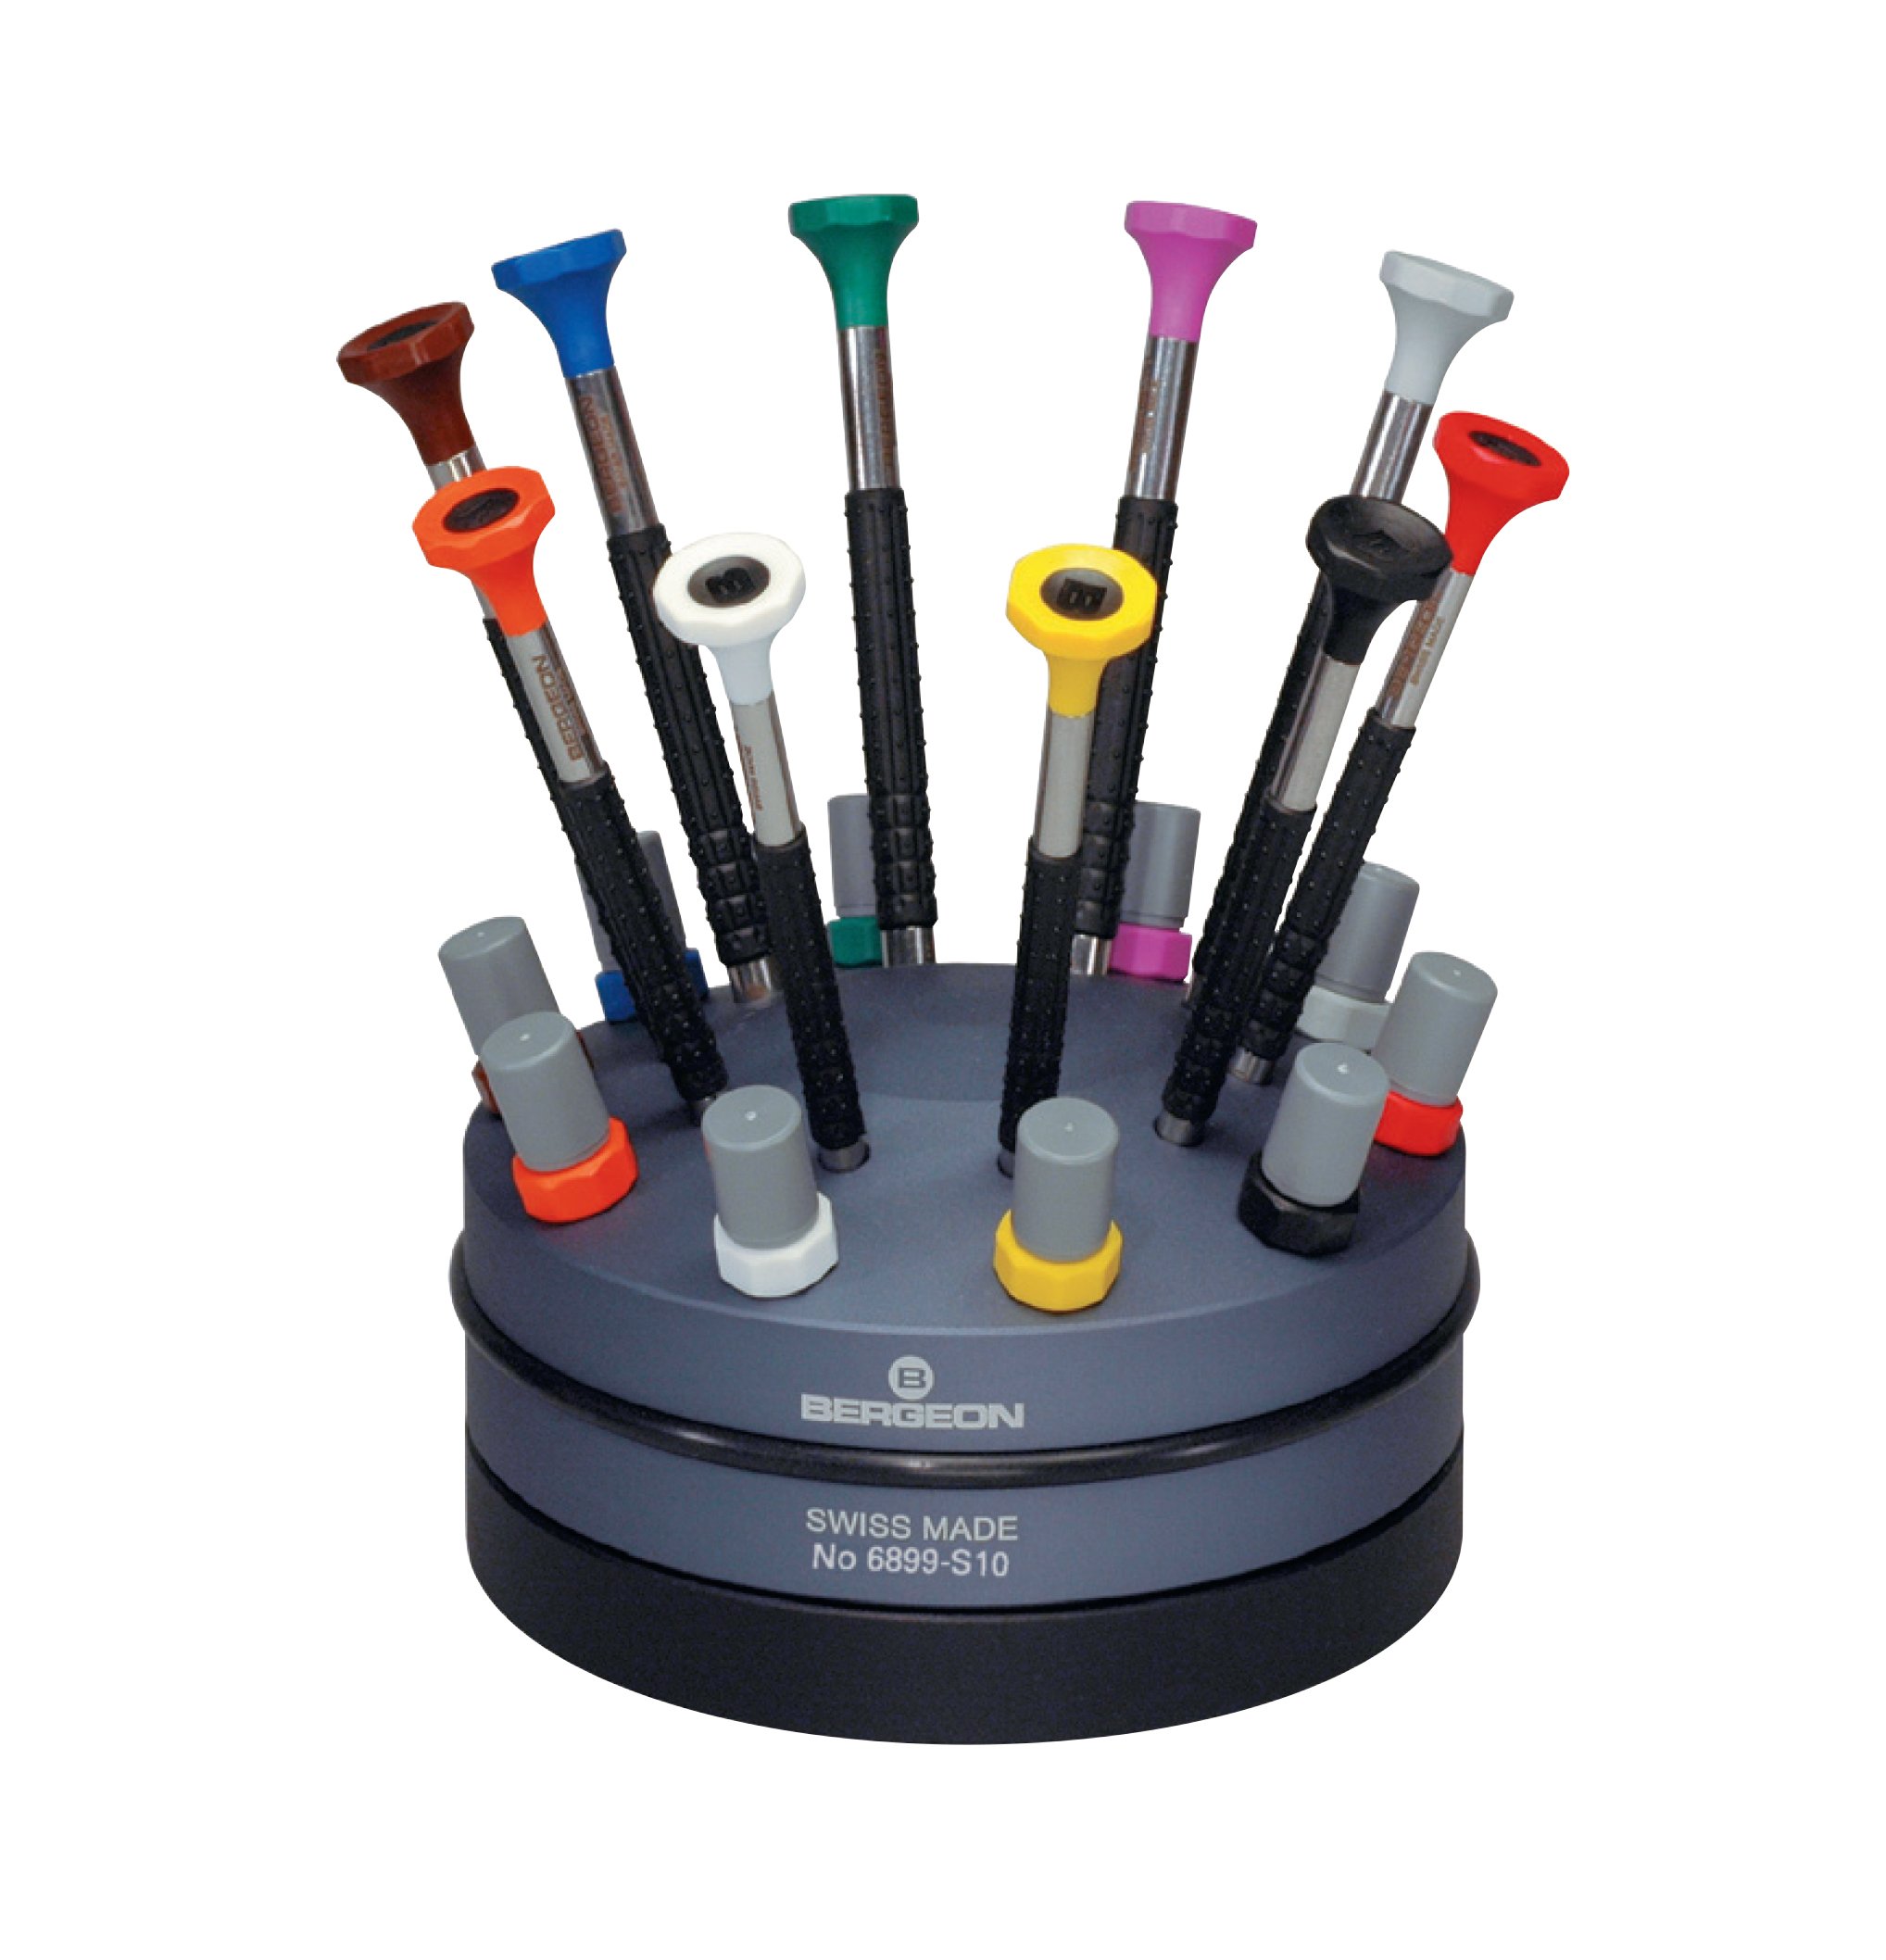 Bergeon 55-604 6899-S10 Rotating Stand with 10 Ergonomic Screwdrivers and 10 Tubes with Spare Blades Watch Repair Kit